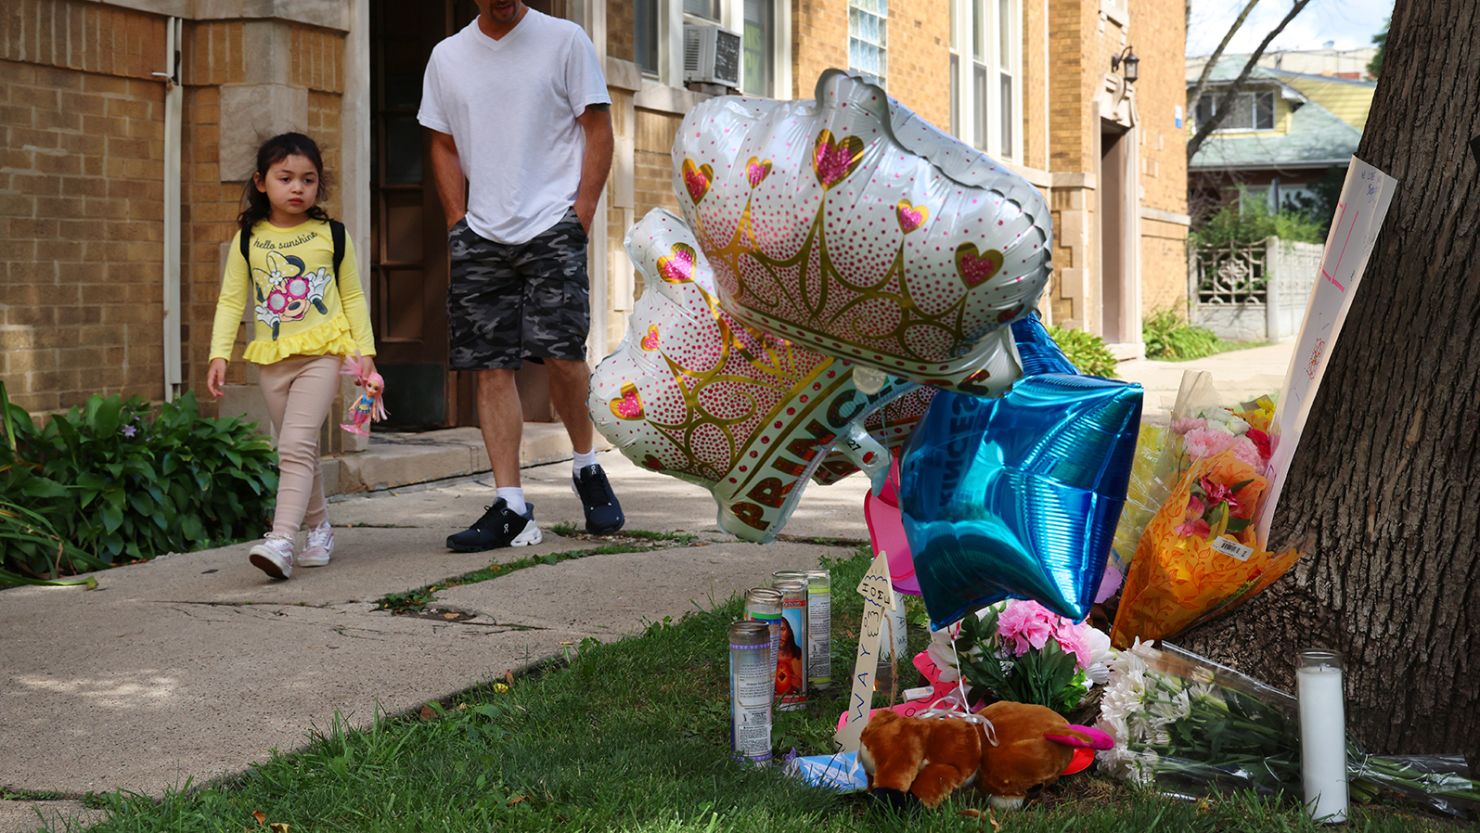 Neighbors pass by a memorial Monday for a 9-year-old girl who was shot and killed Saturday outside her apartment in Portage Park, Chicago.